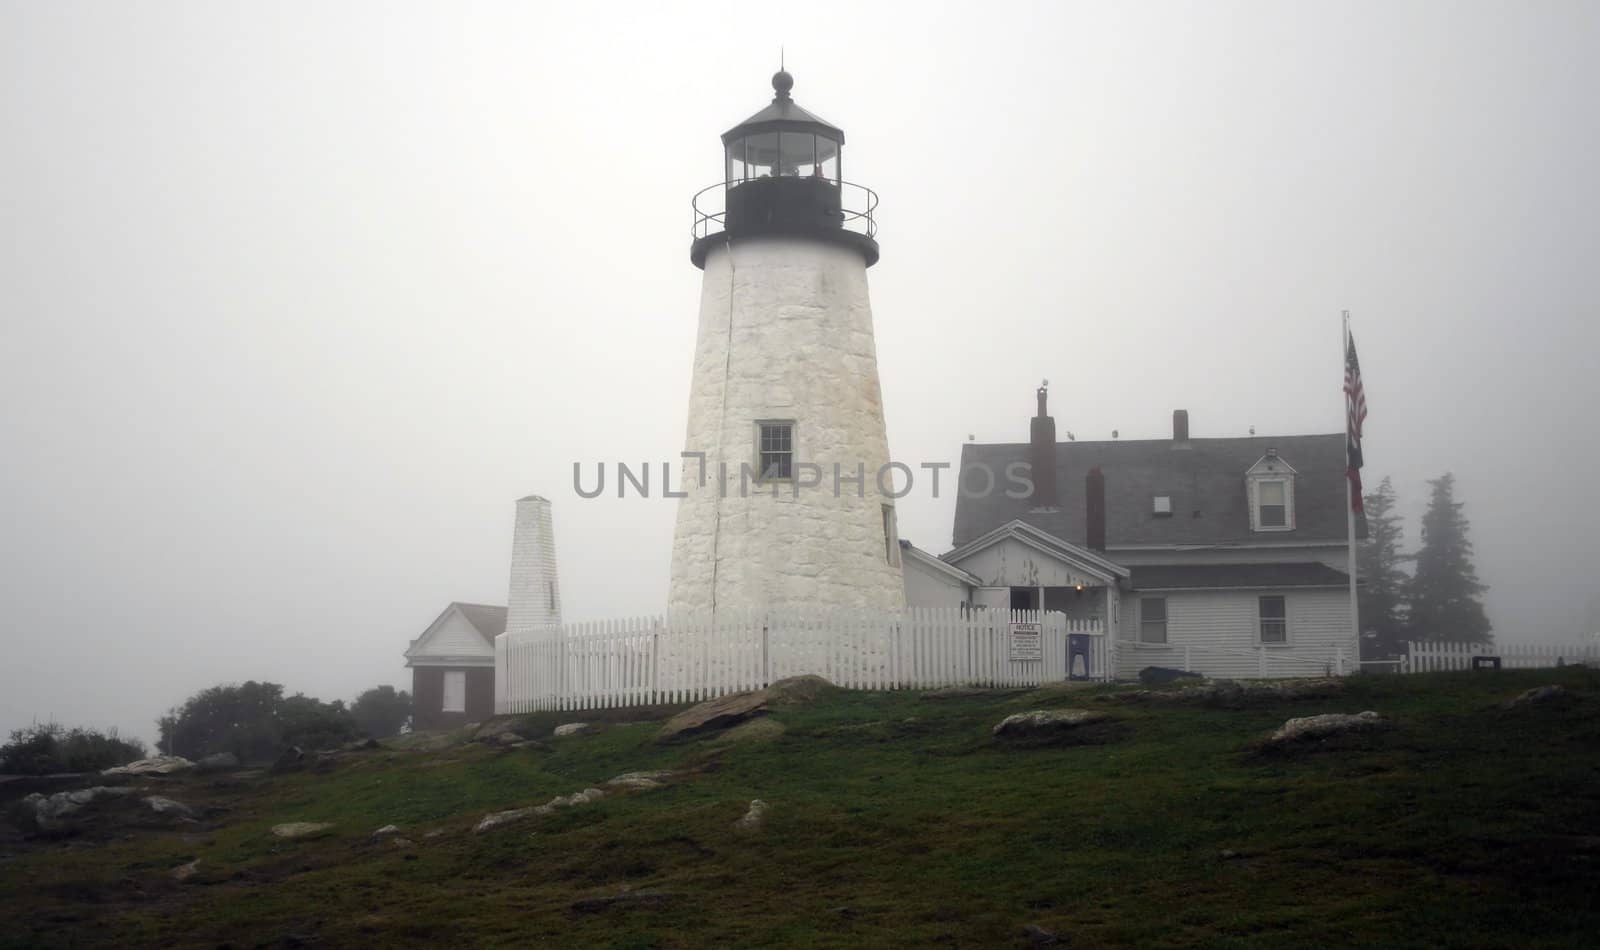 A lighthouse sitting in light fog in Maine, USA